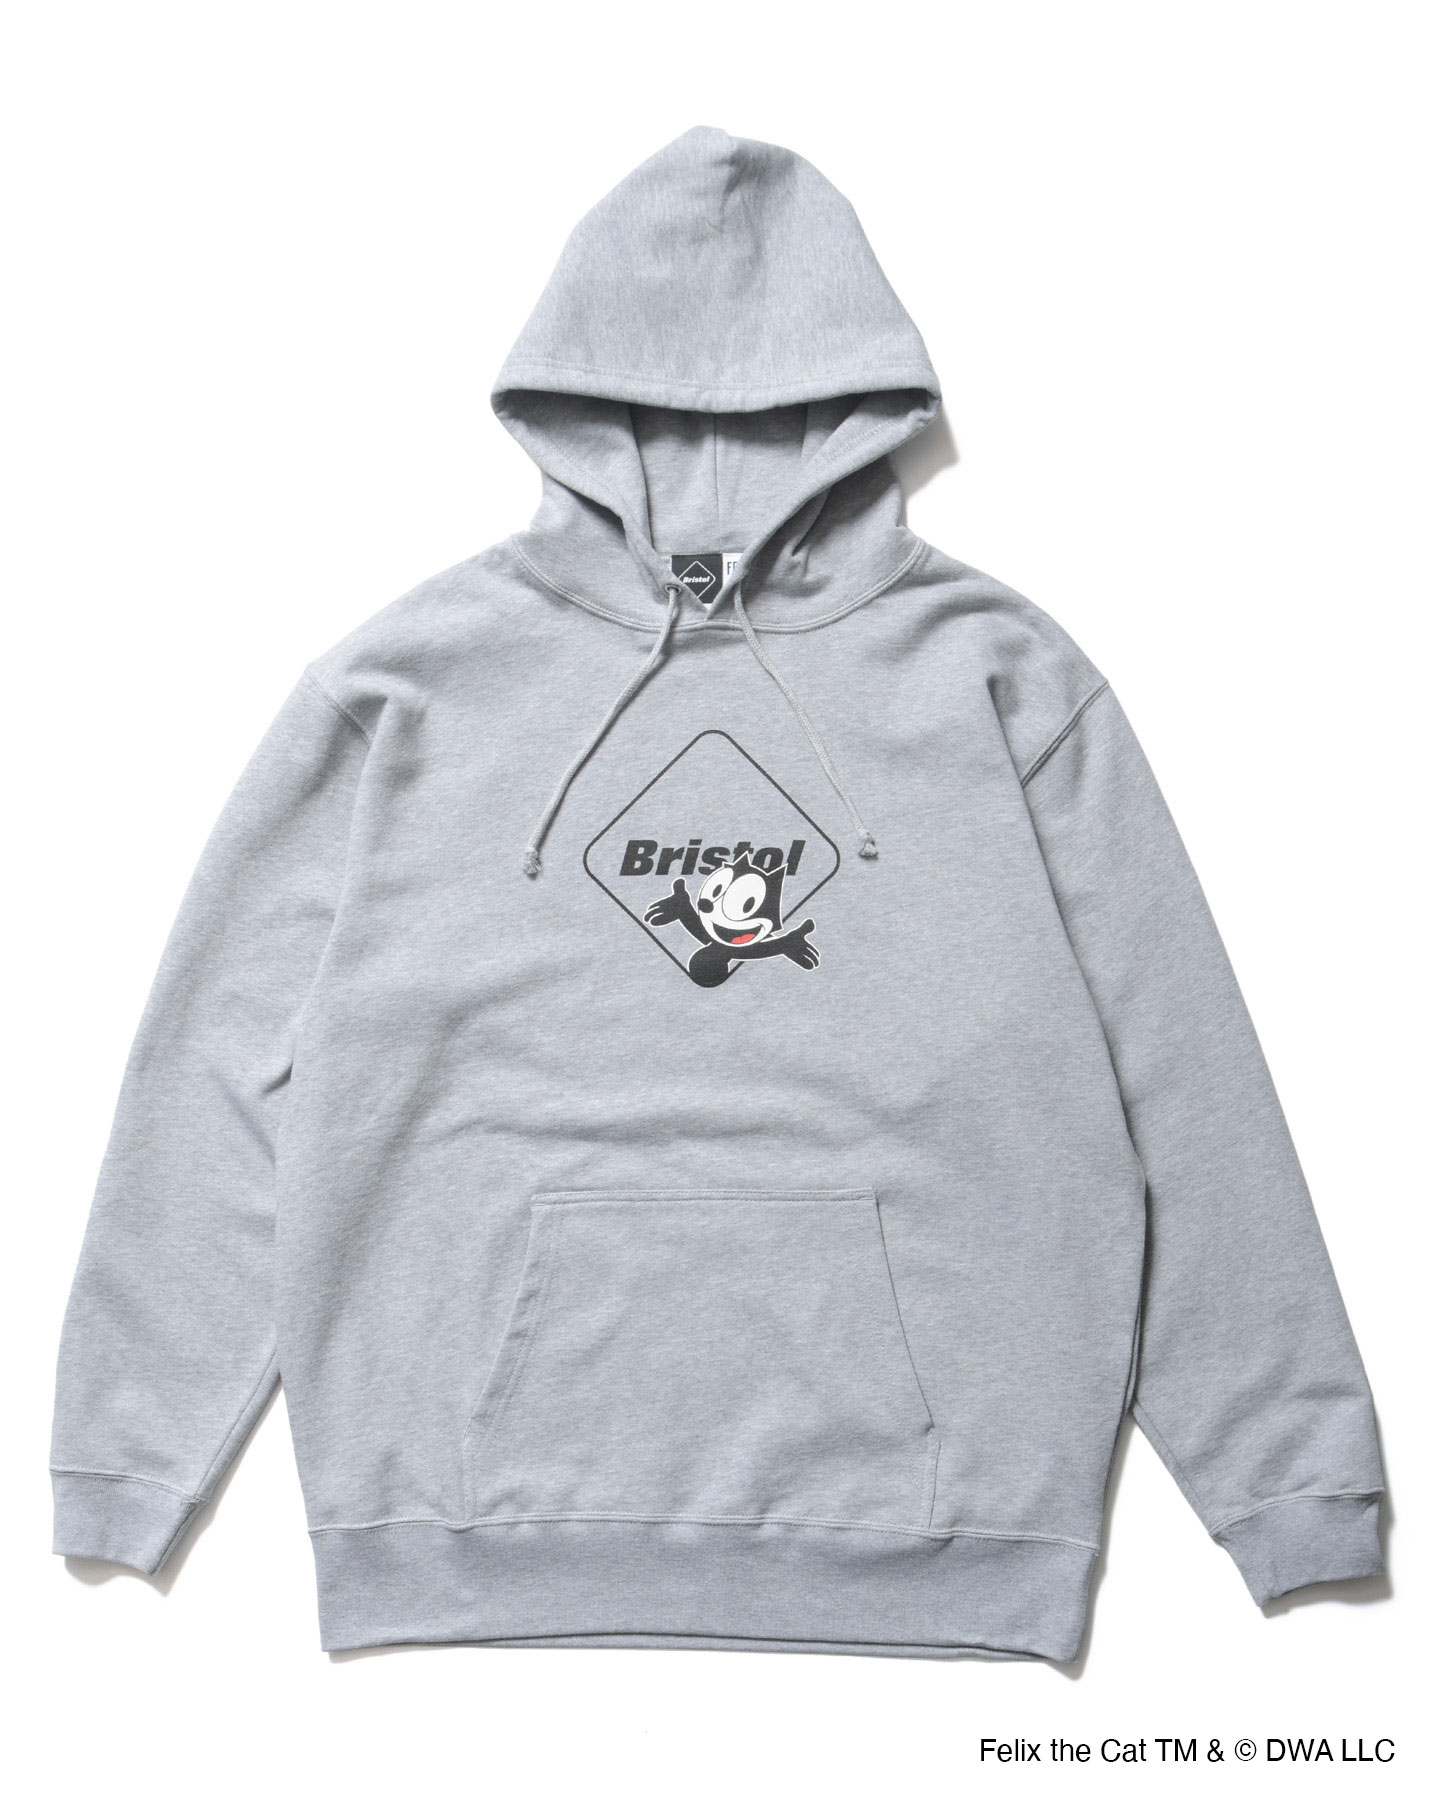 SOPH. | FELIX THE CAT SUPPORTER SWEAT HOODIE(M GRAY):